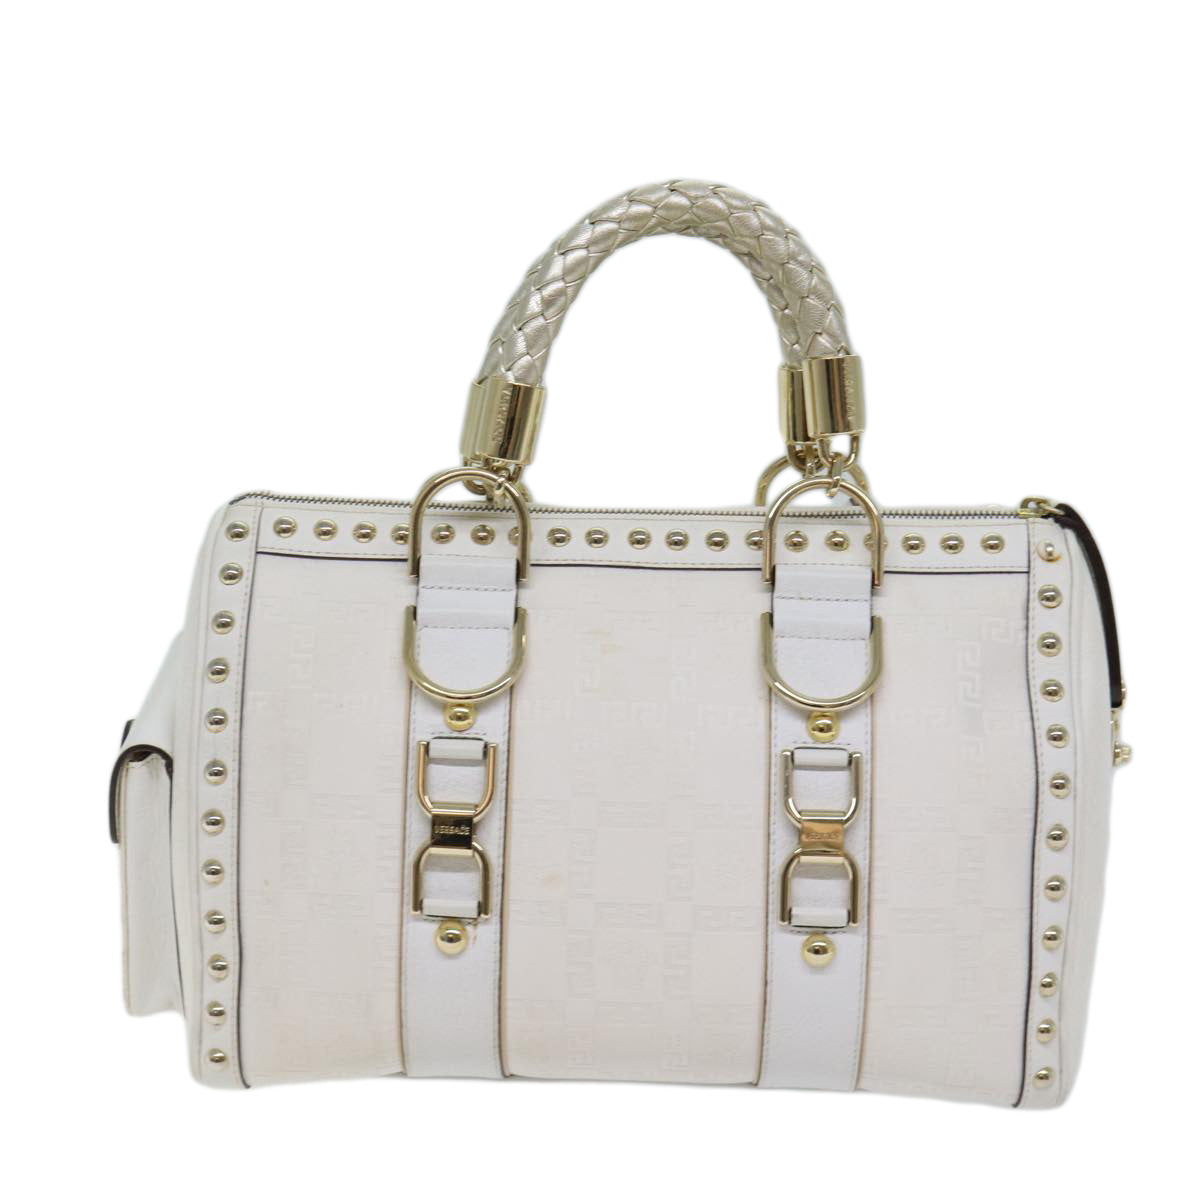 VERSACE Boston Bag Leather White Auth 70452A - 0